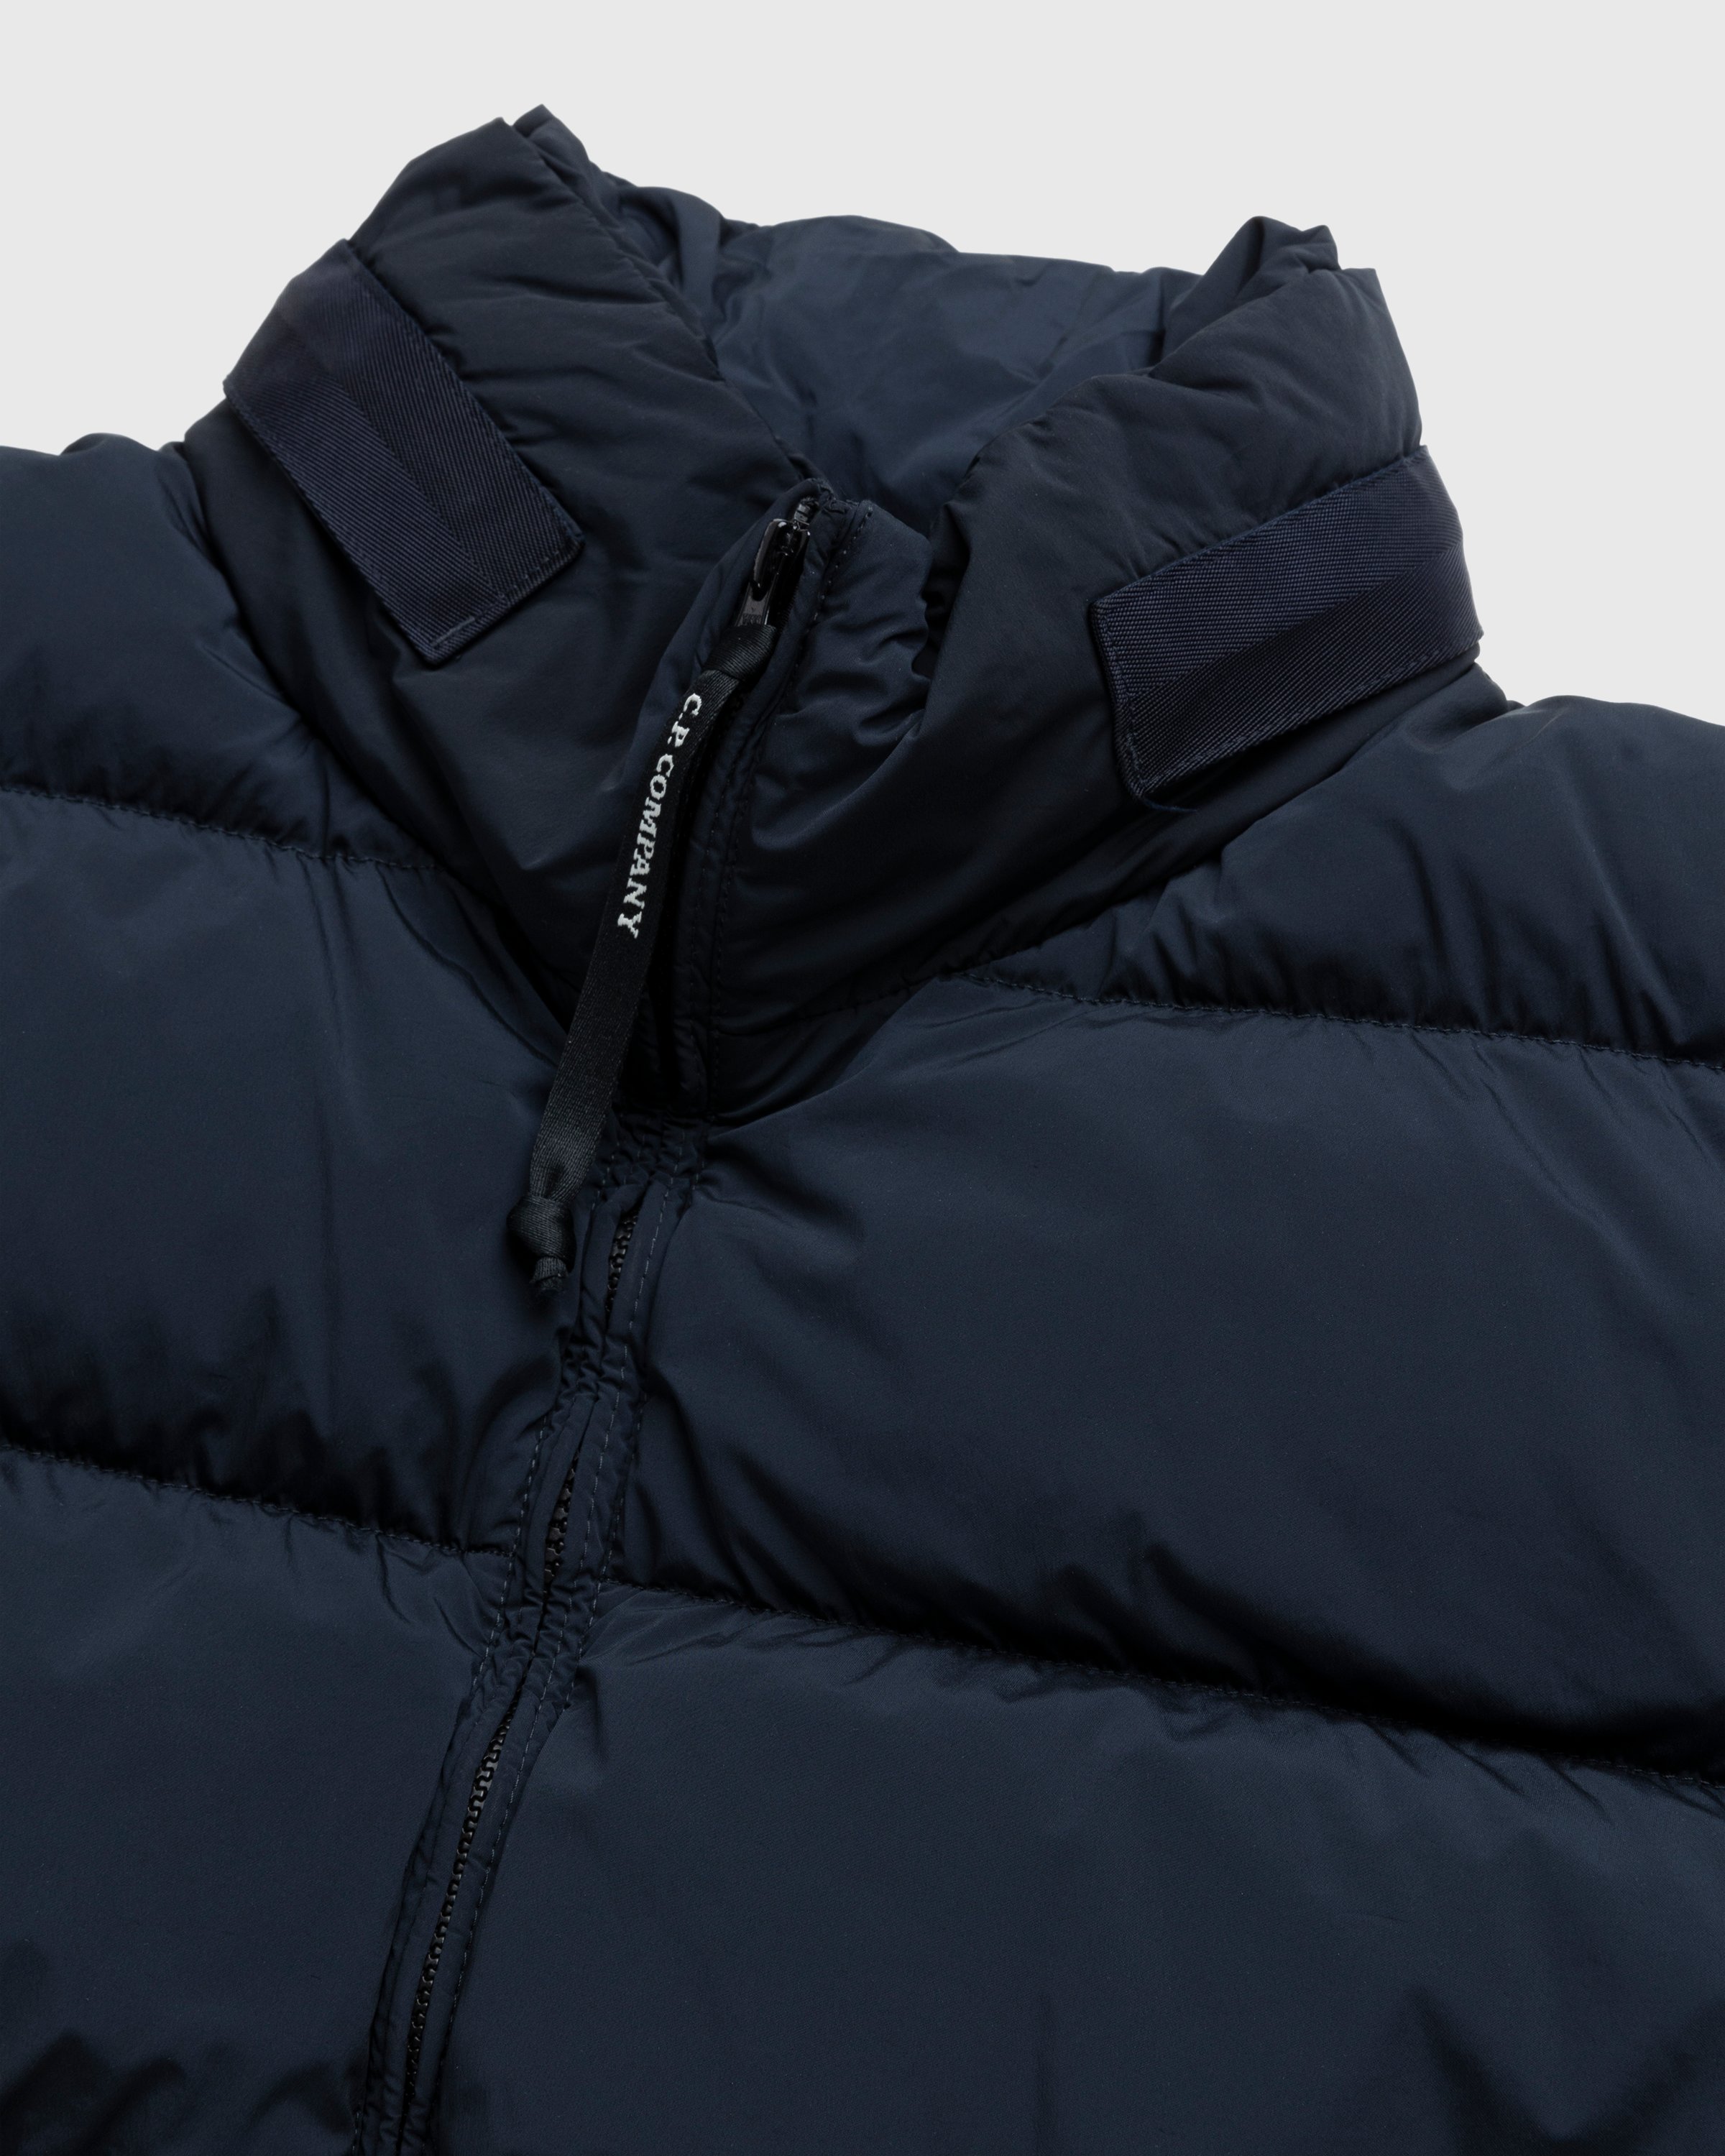 C.P. Company - Nycra-R Down Jacket Black - Outerwear - Black - Image 5